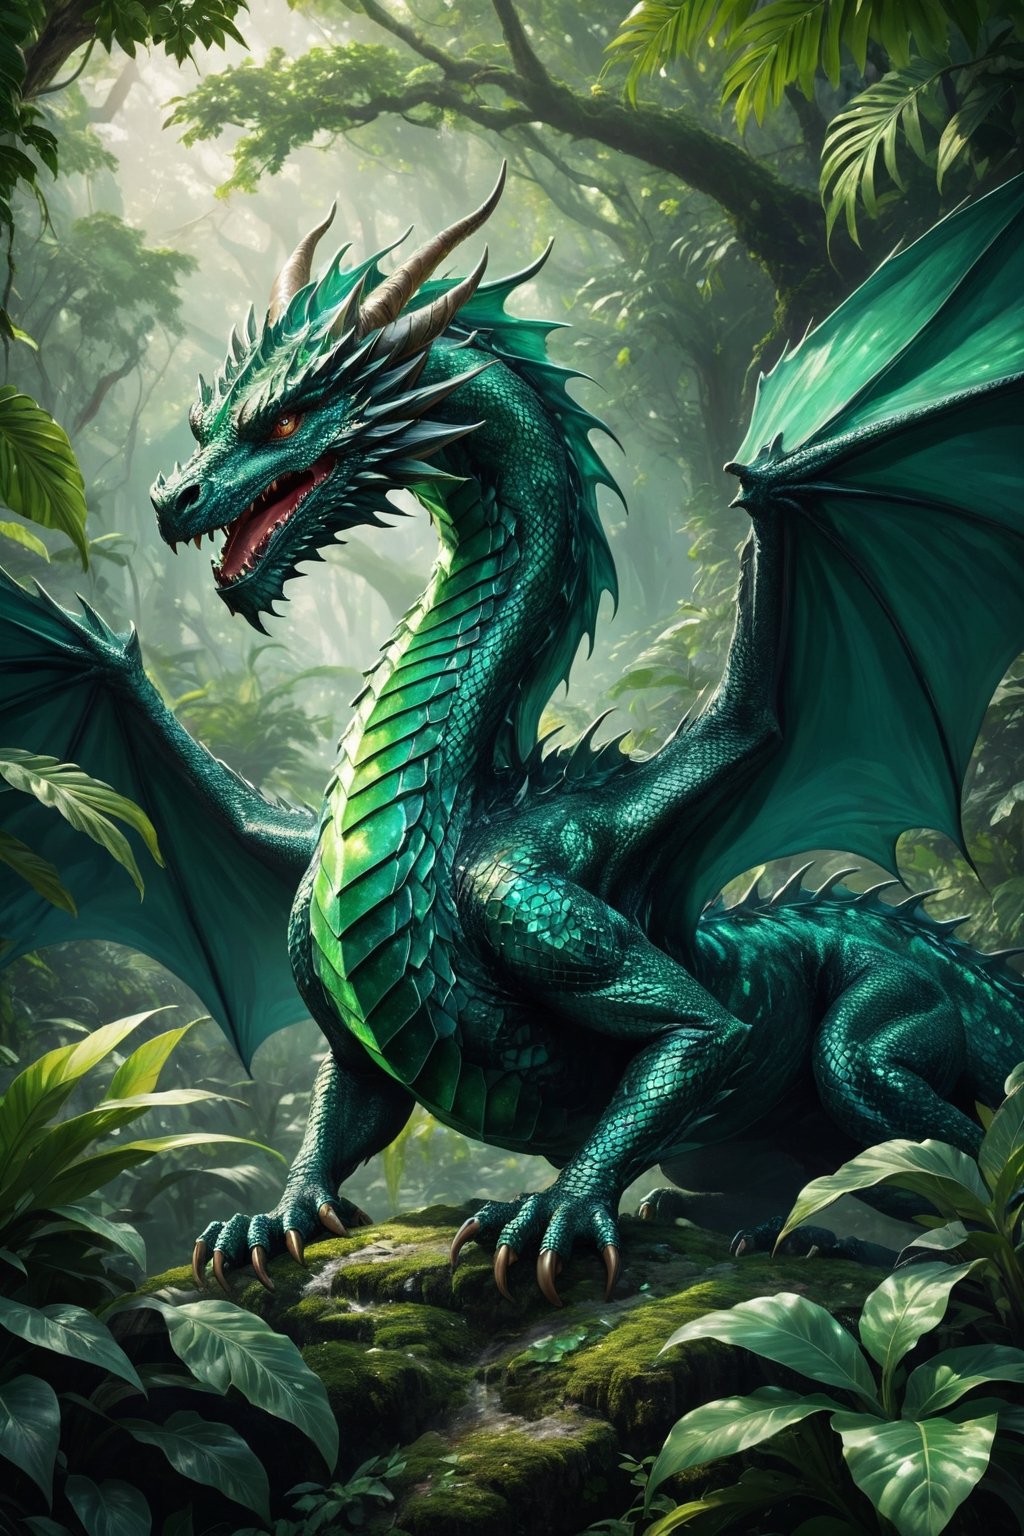 Generate hyper realistic image of a dragon with emerald, shimmering skin that reflects light in mesmerizing patterns, giving them an ethereal and otherworldly appearance, jungle landscape,